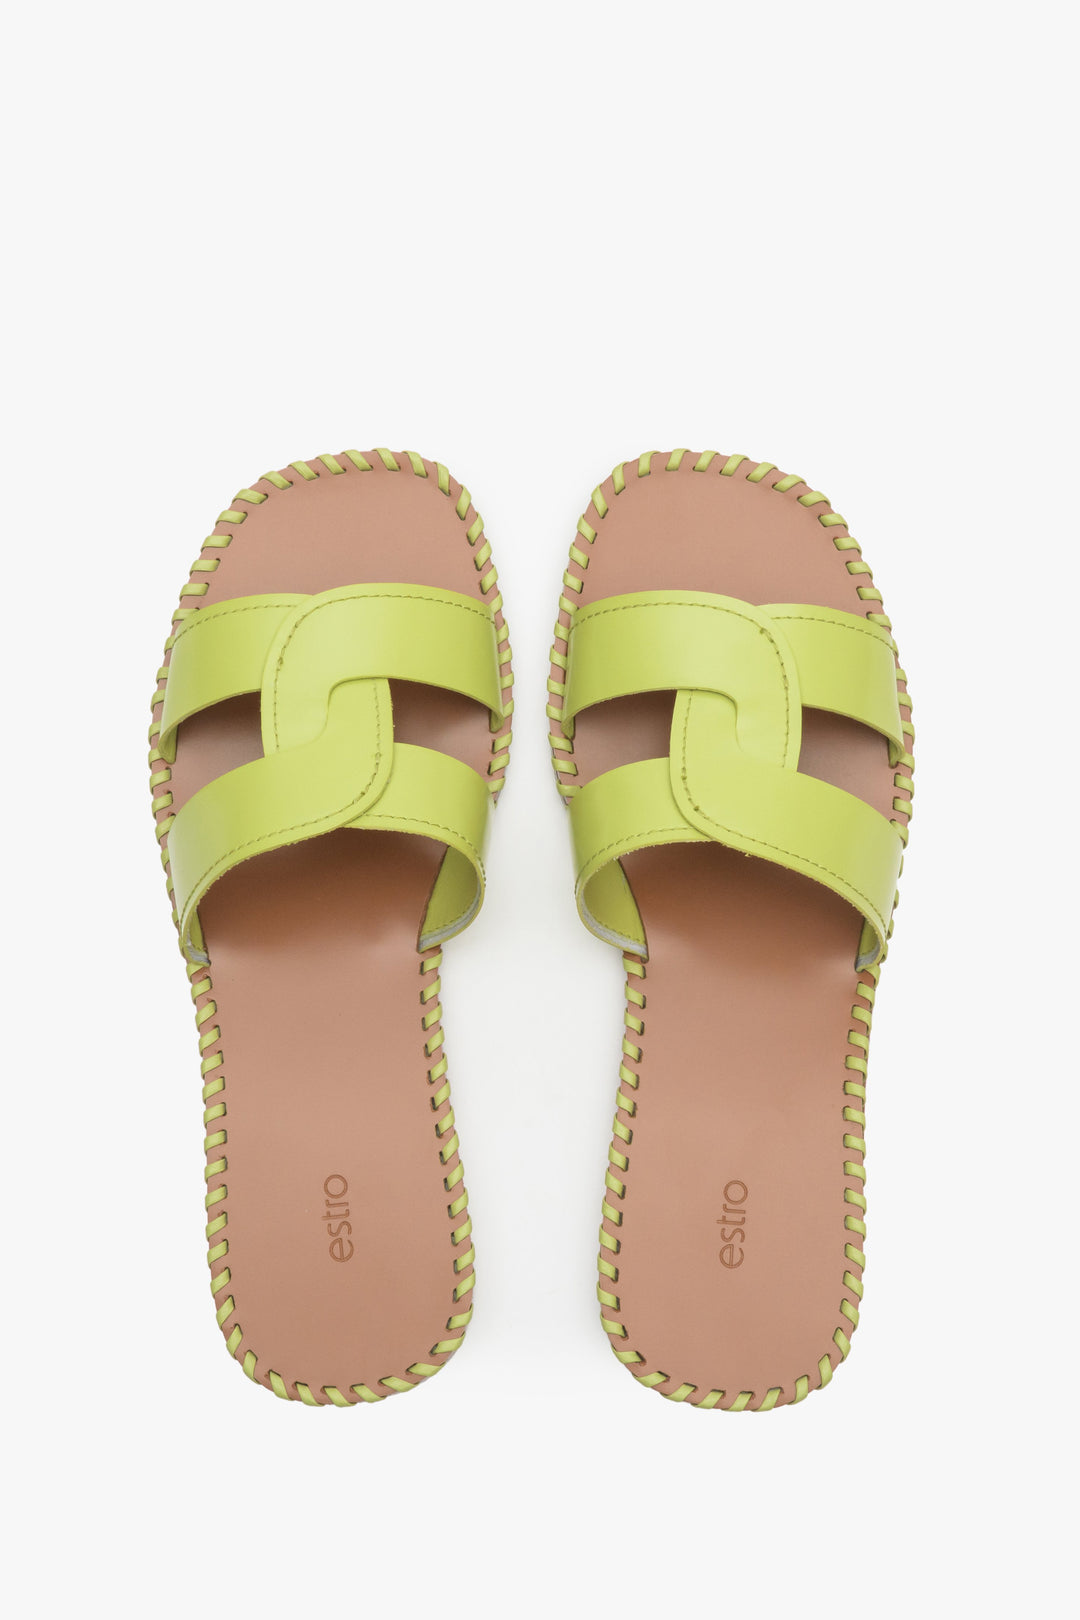 Women's green slide sandals made of genuine leather, Estro brand - presentation from above.